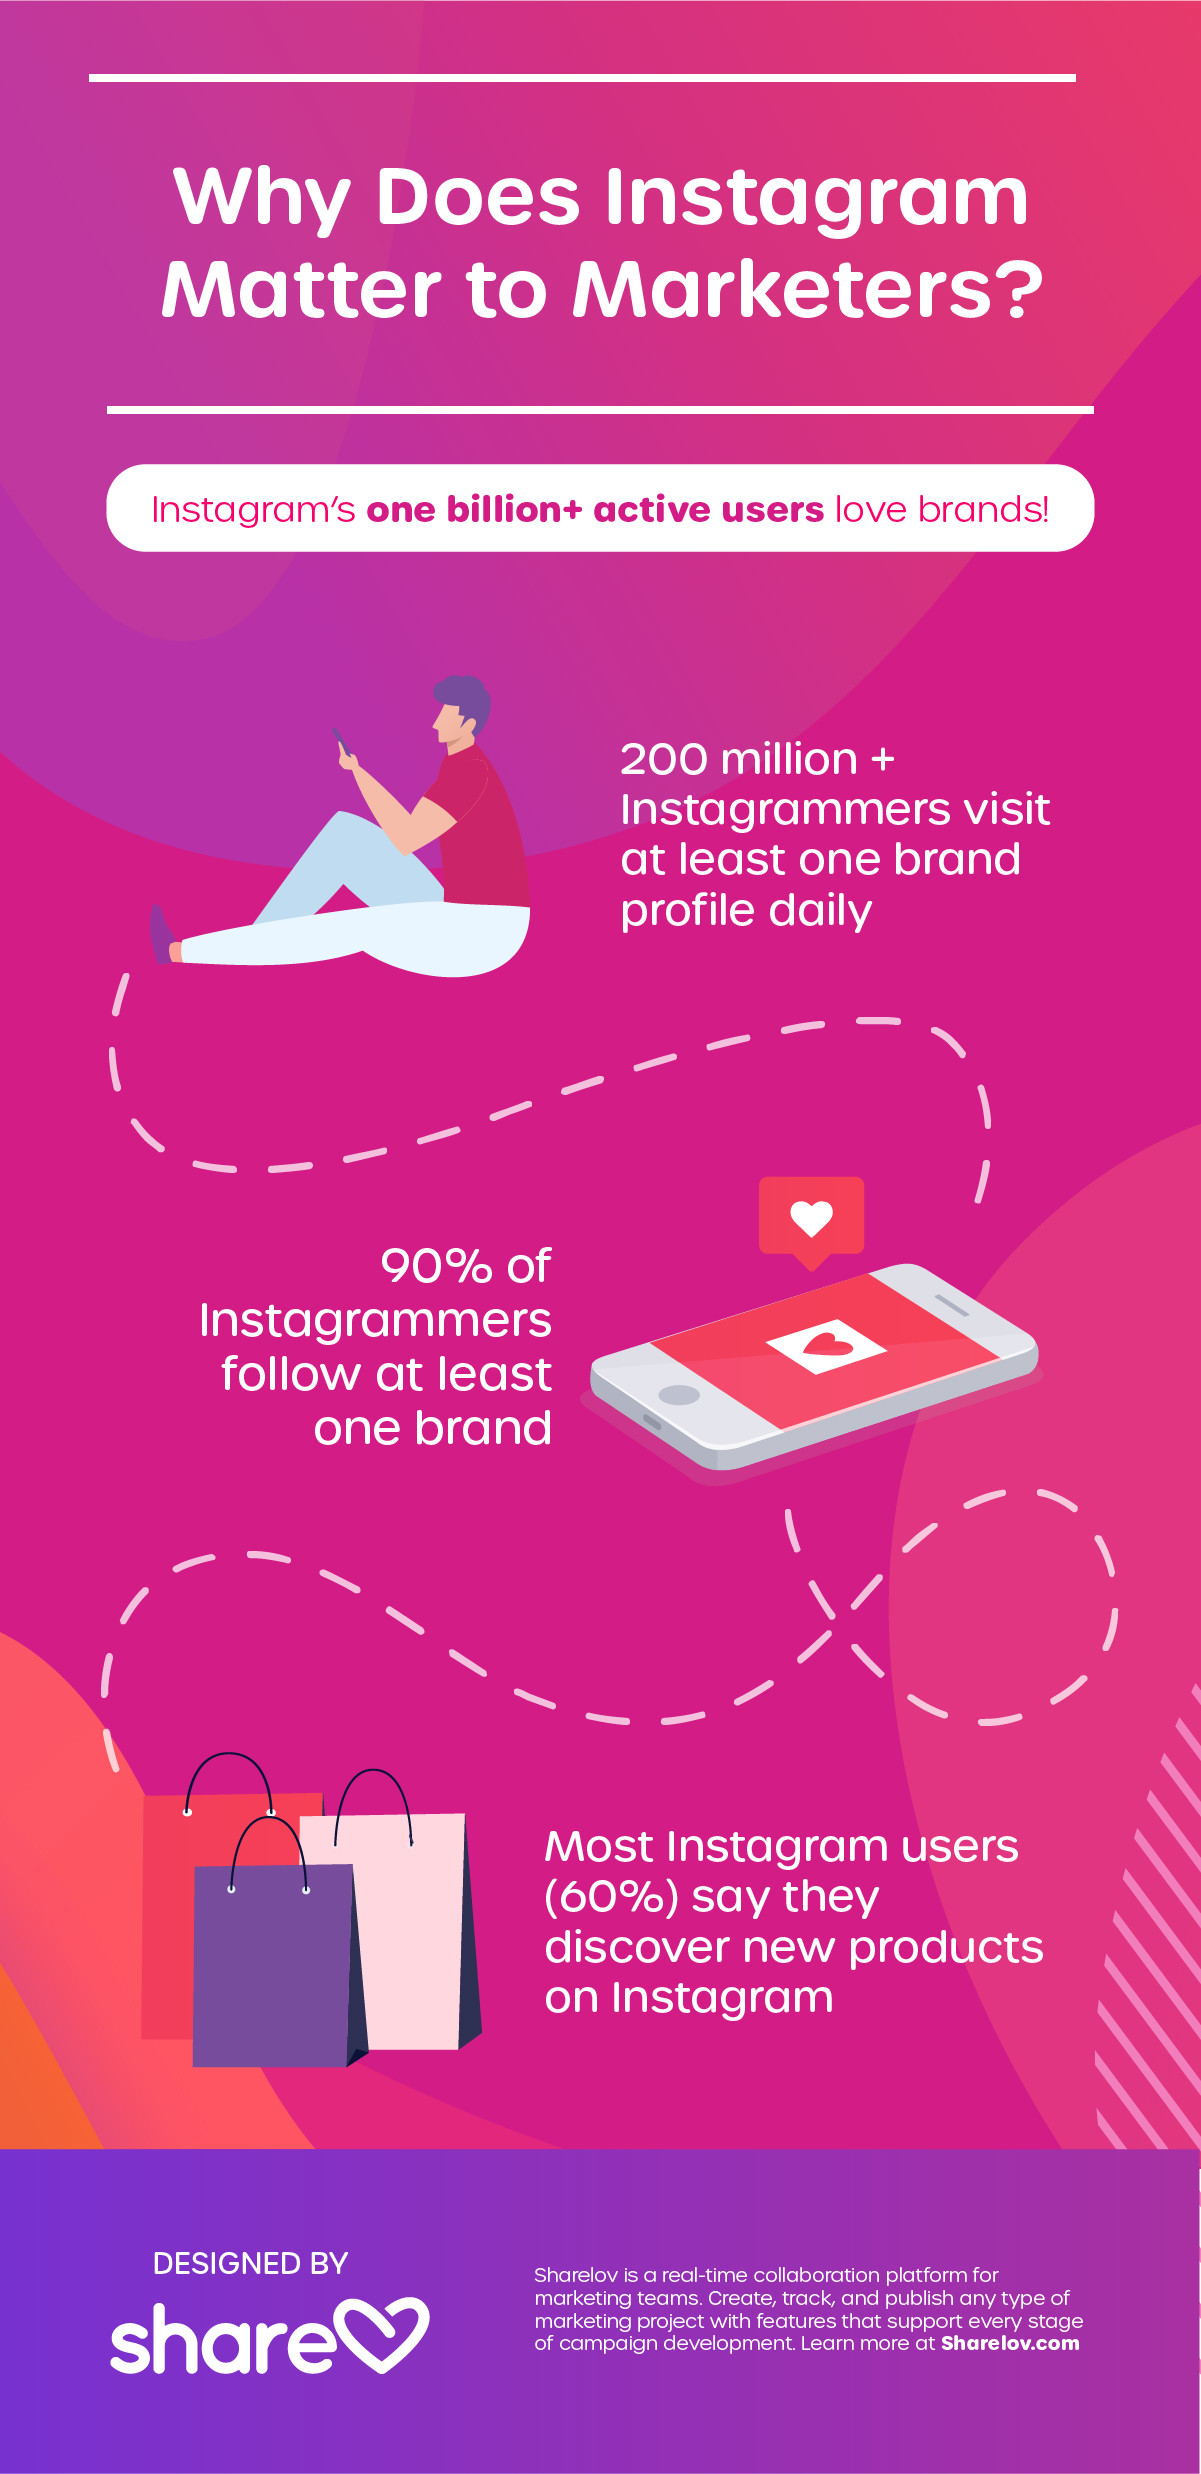 Why Does Instagram Matter to Marketers - Infographic